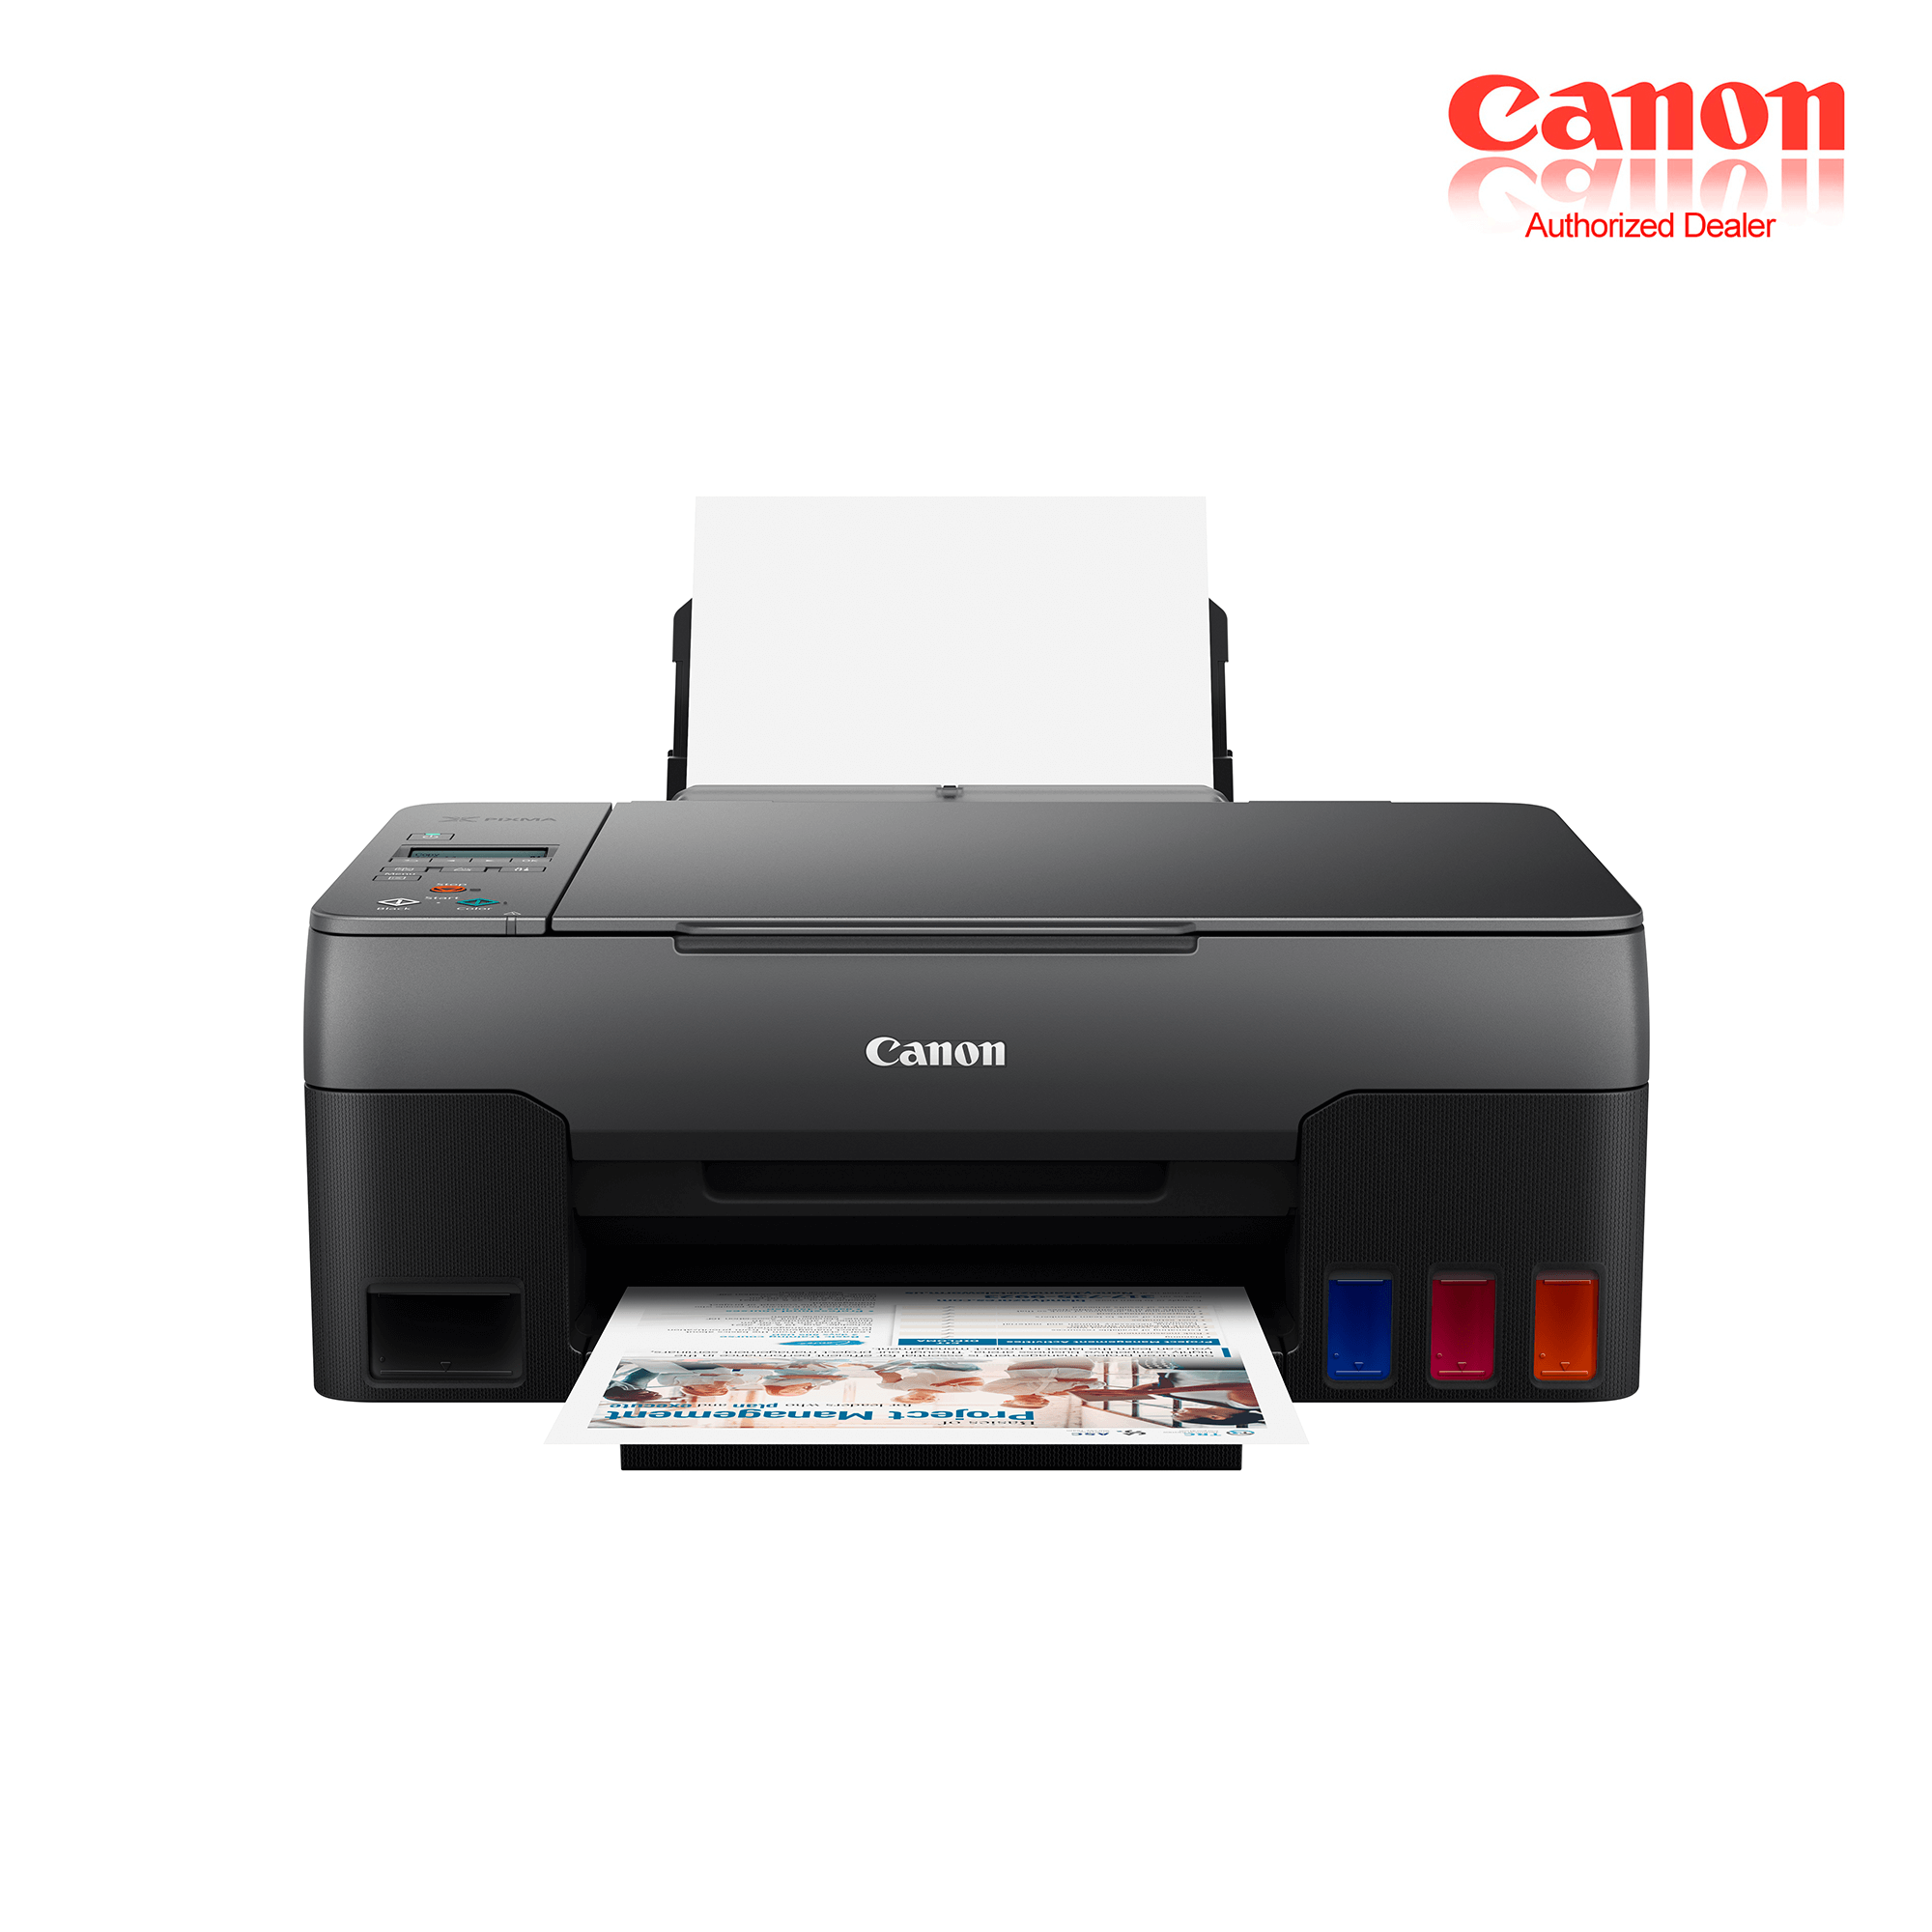 Canon PIXMA G2020 Refillable Ink Tank All In One Printer rear feeder